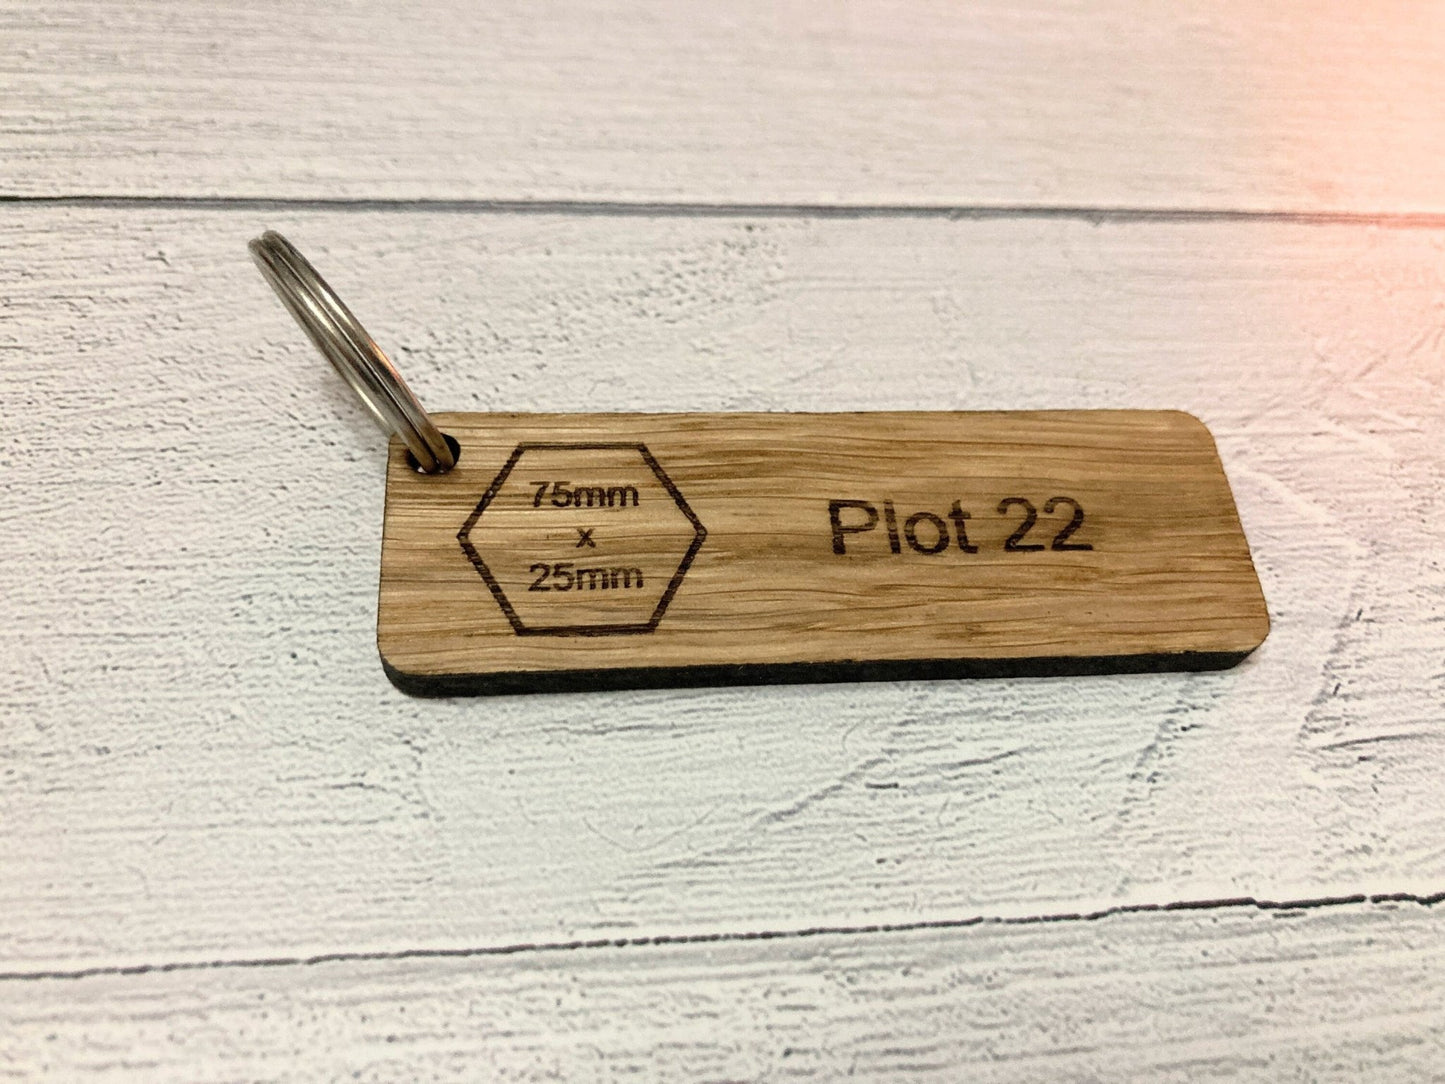 Premium Personalised Logo Keyrings - Crafted from Oak Wood | Various Sizes Available | Perfect for Corporate Gifting | Fast Shipping - CherryGroveCraft